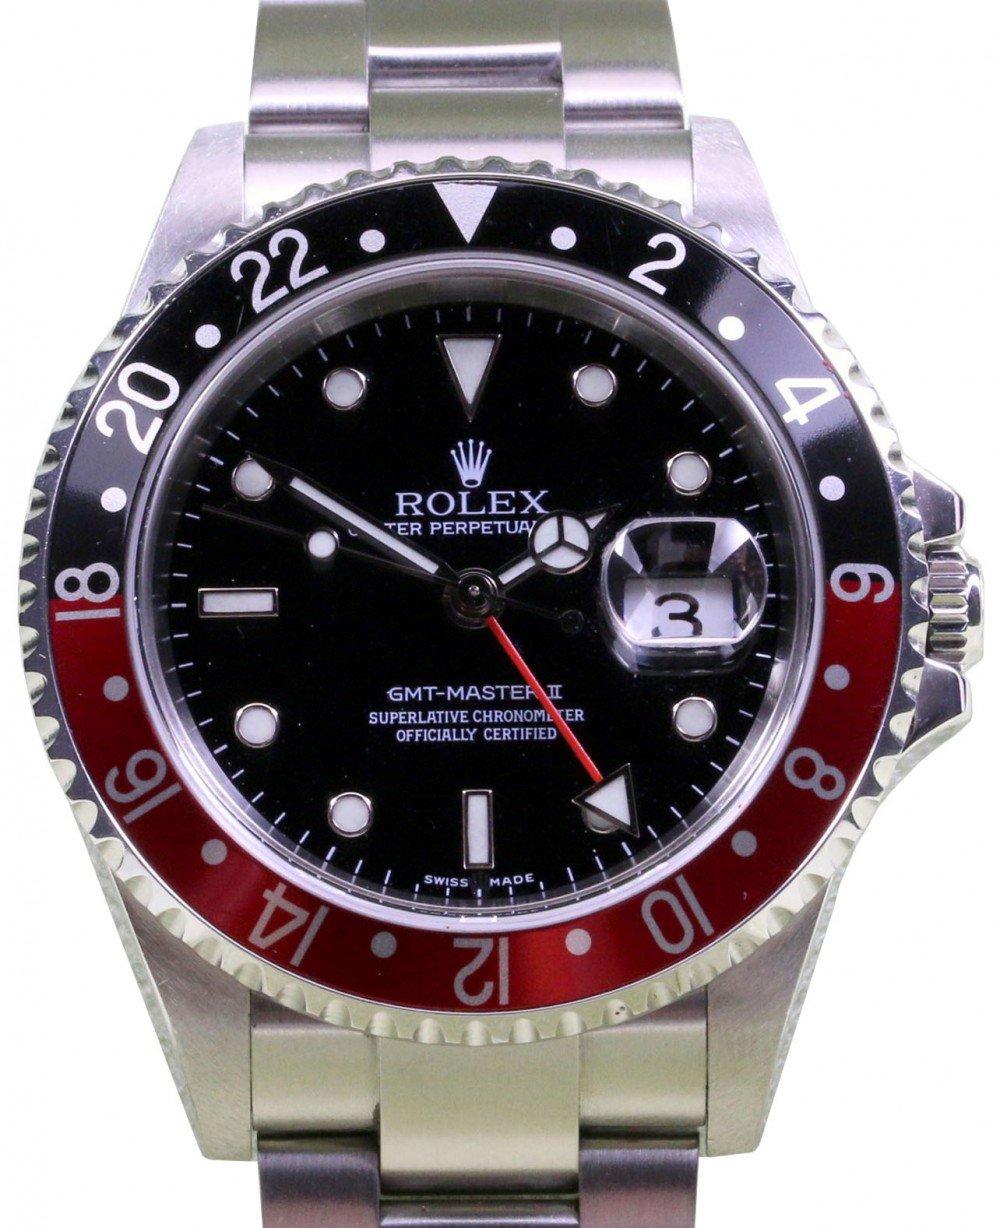 Rolex GMT-Master II 2 16710 Coke Men's 40mm Red Stainless No BOX/PAPERS